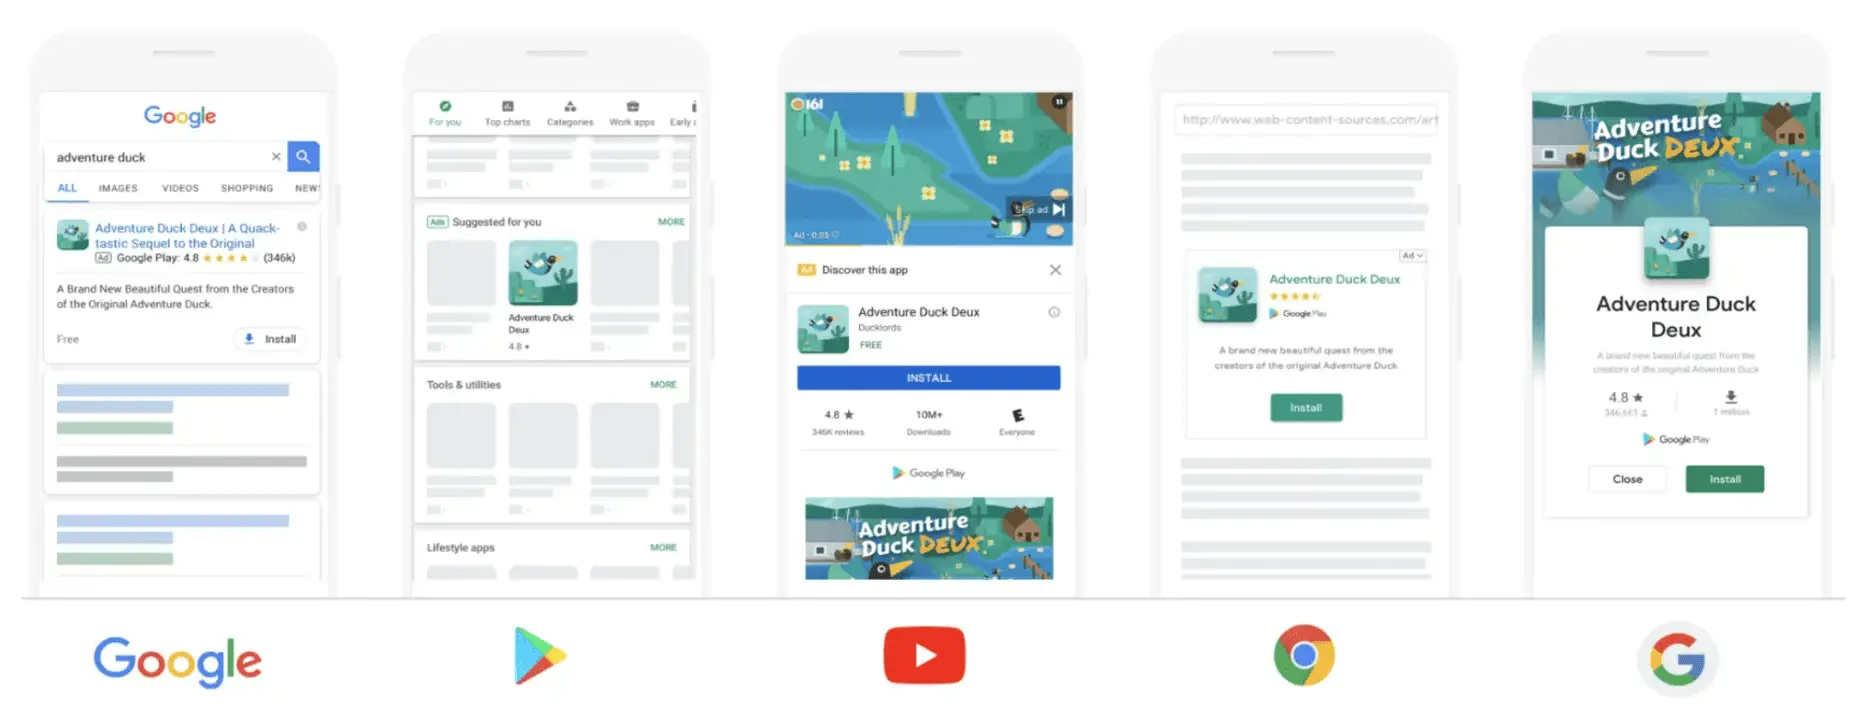 Example on how you can promote the app via Google